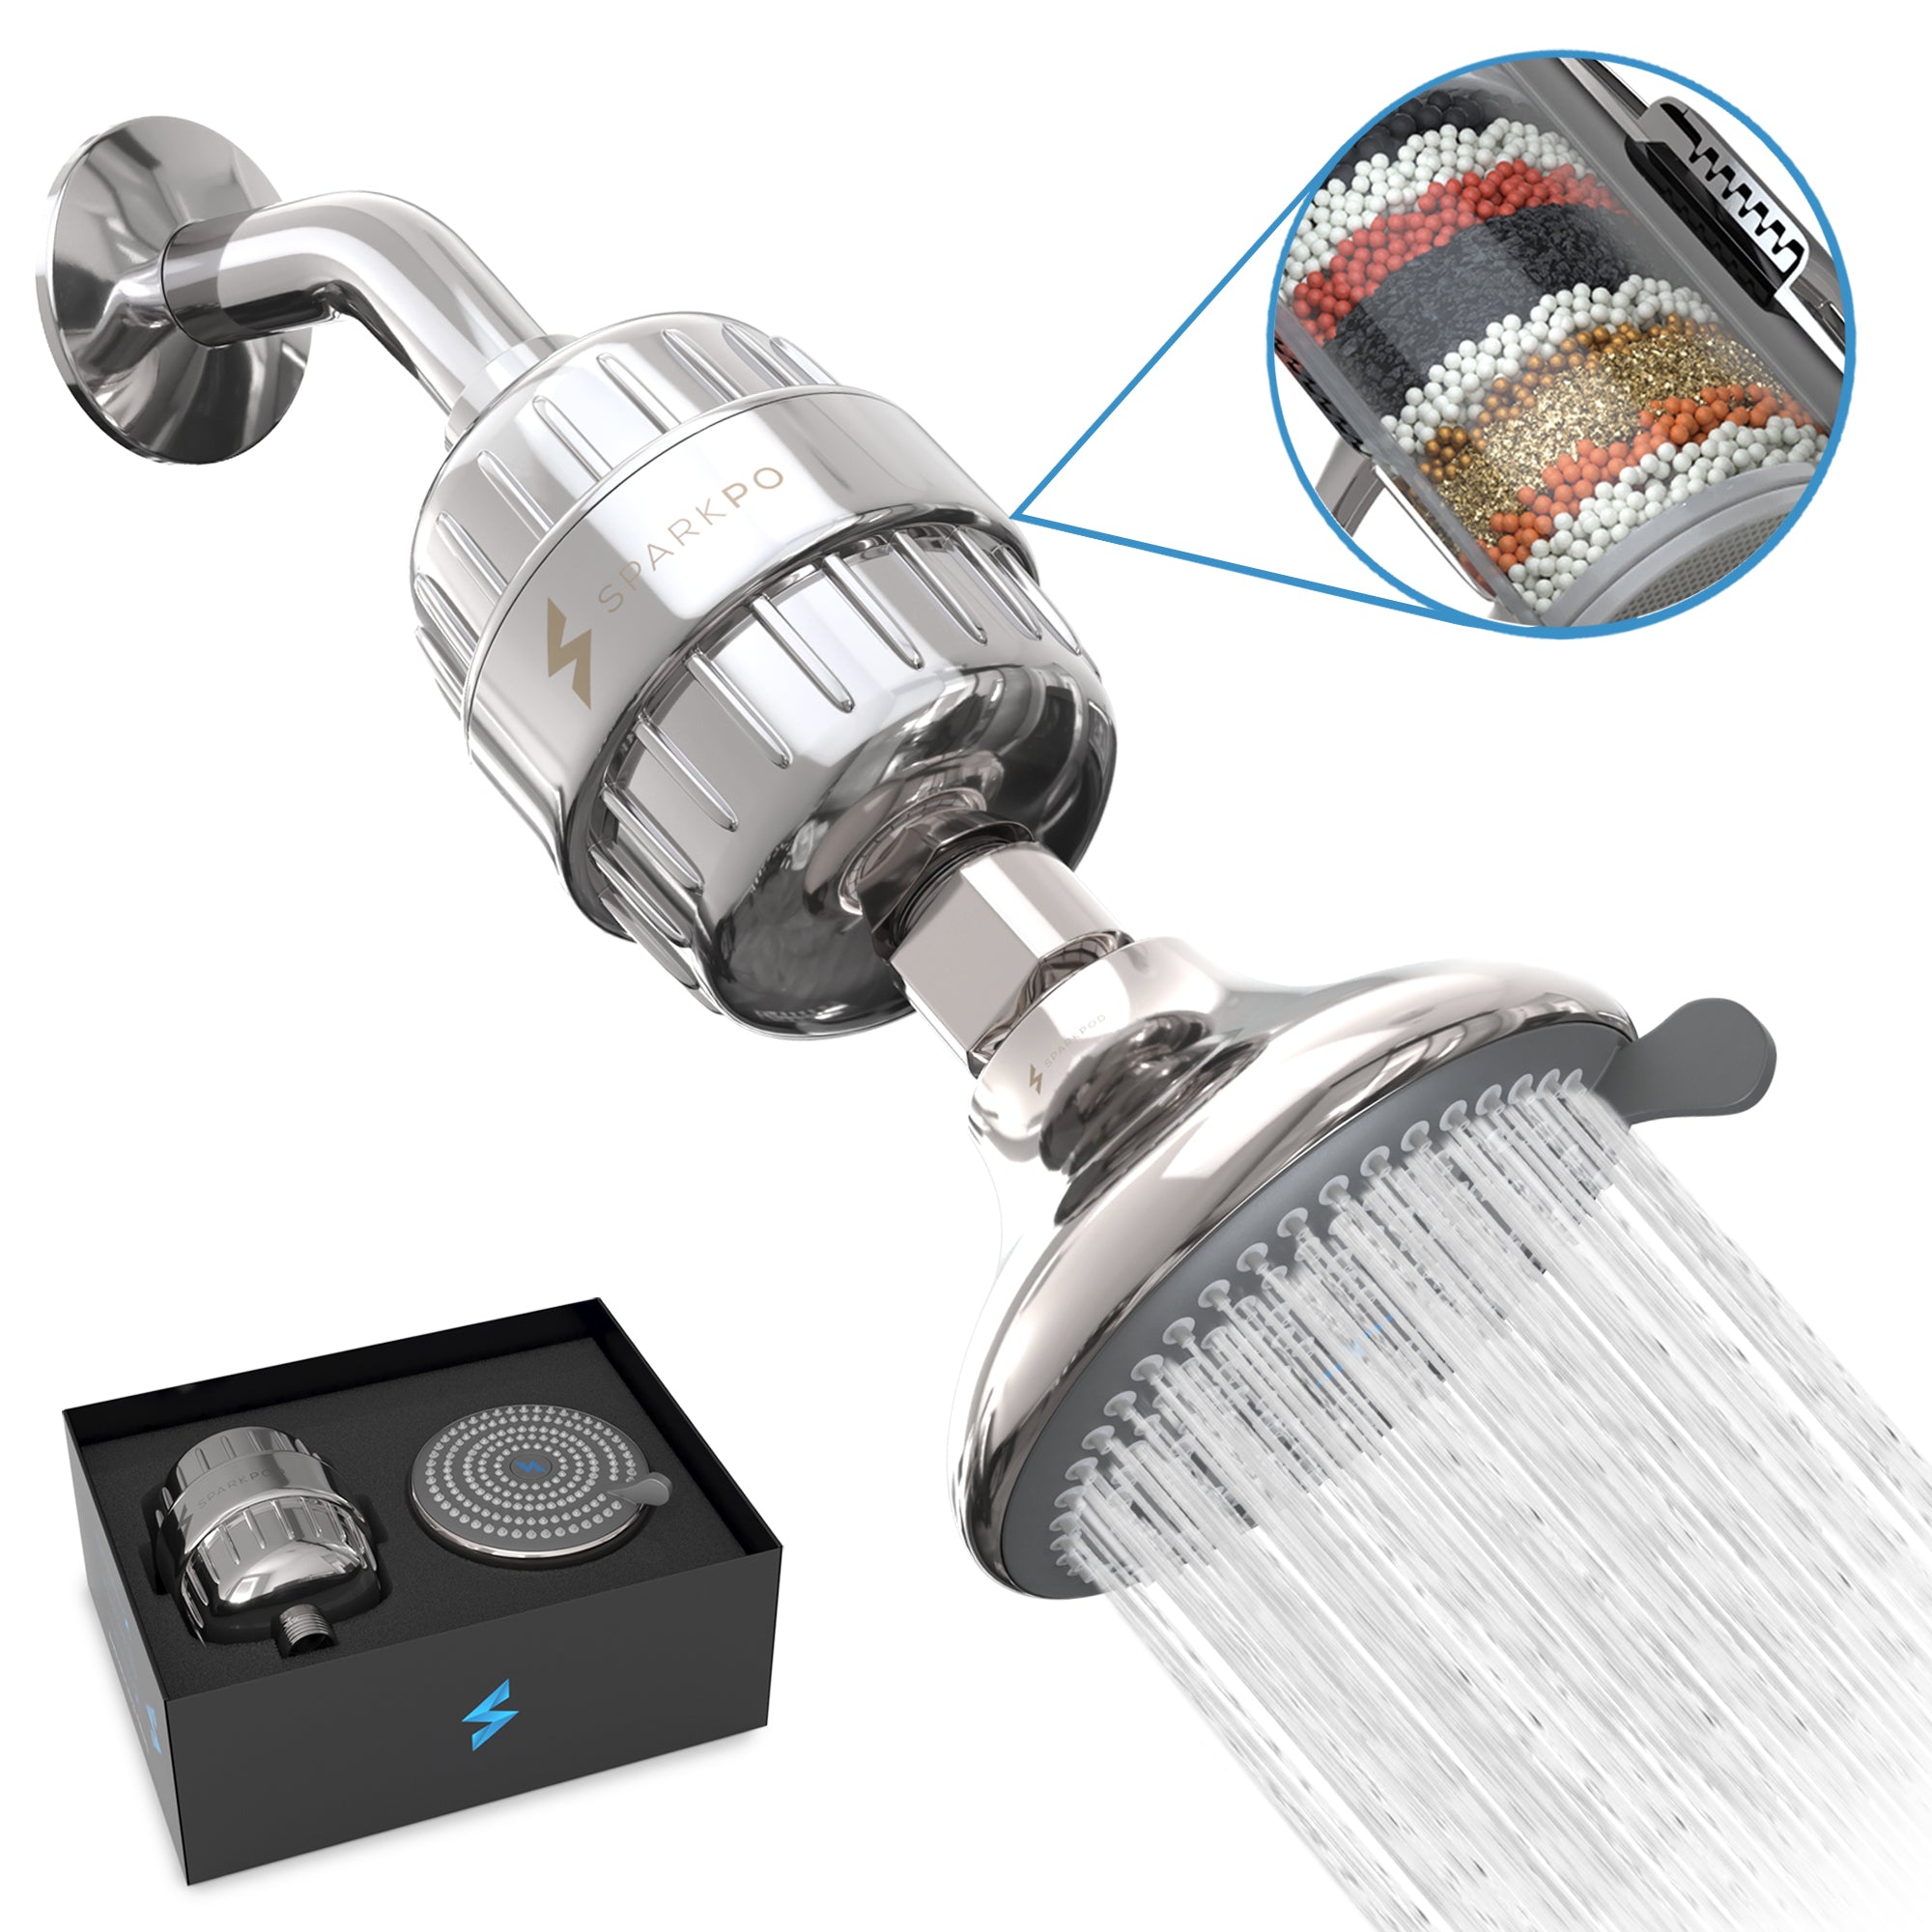 This Powerful Shower Head Filter Helps Improve Skin and Hair